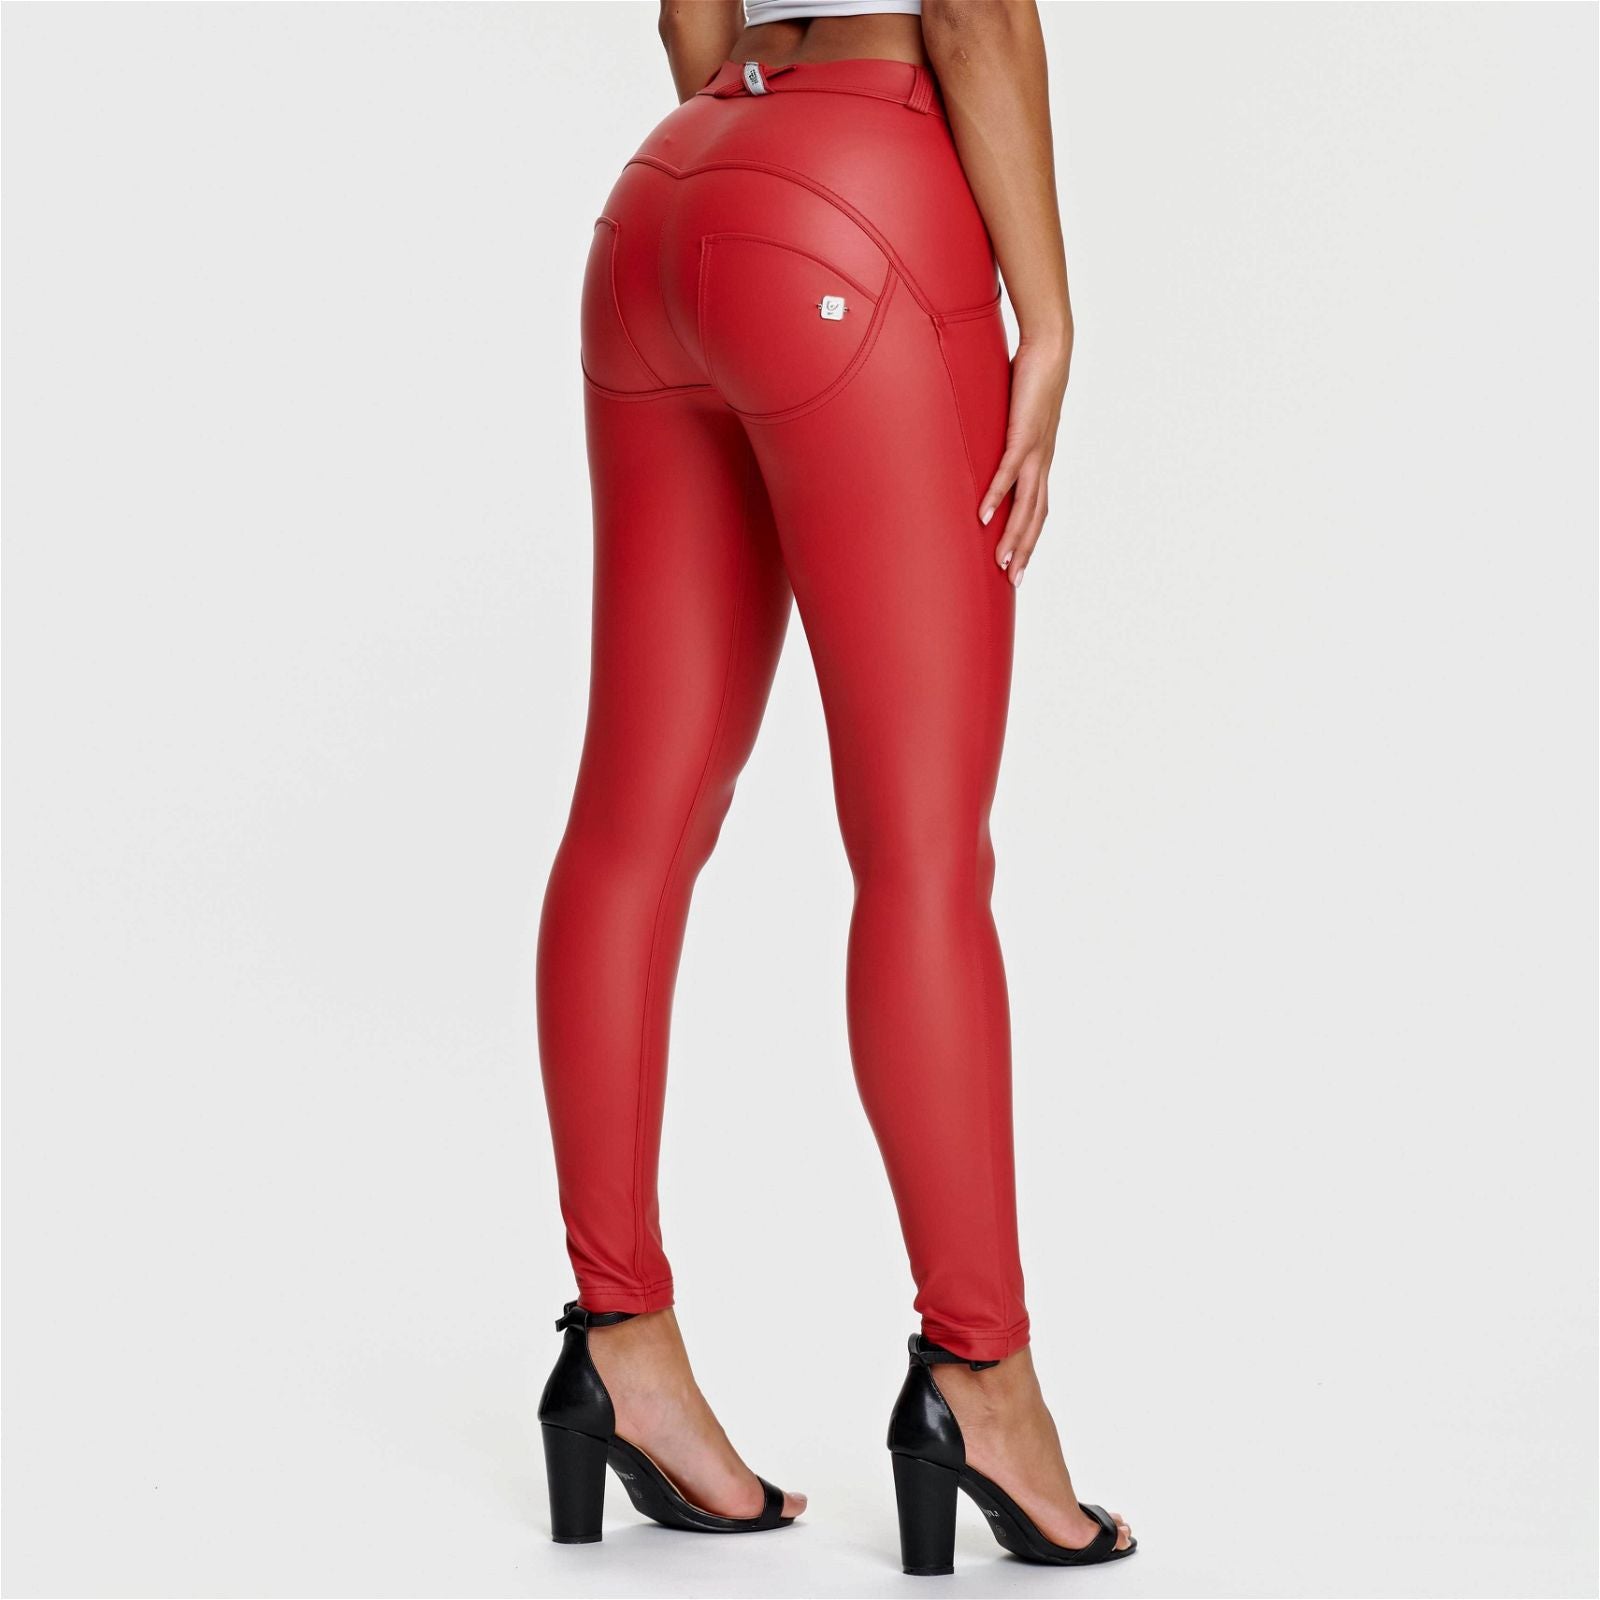 WR.UP® Faux Leather - Mid Rise - Full Length - Red 1